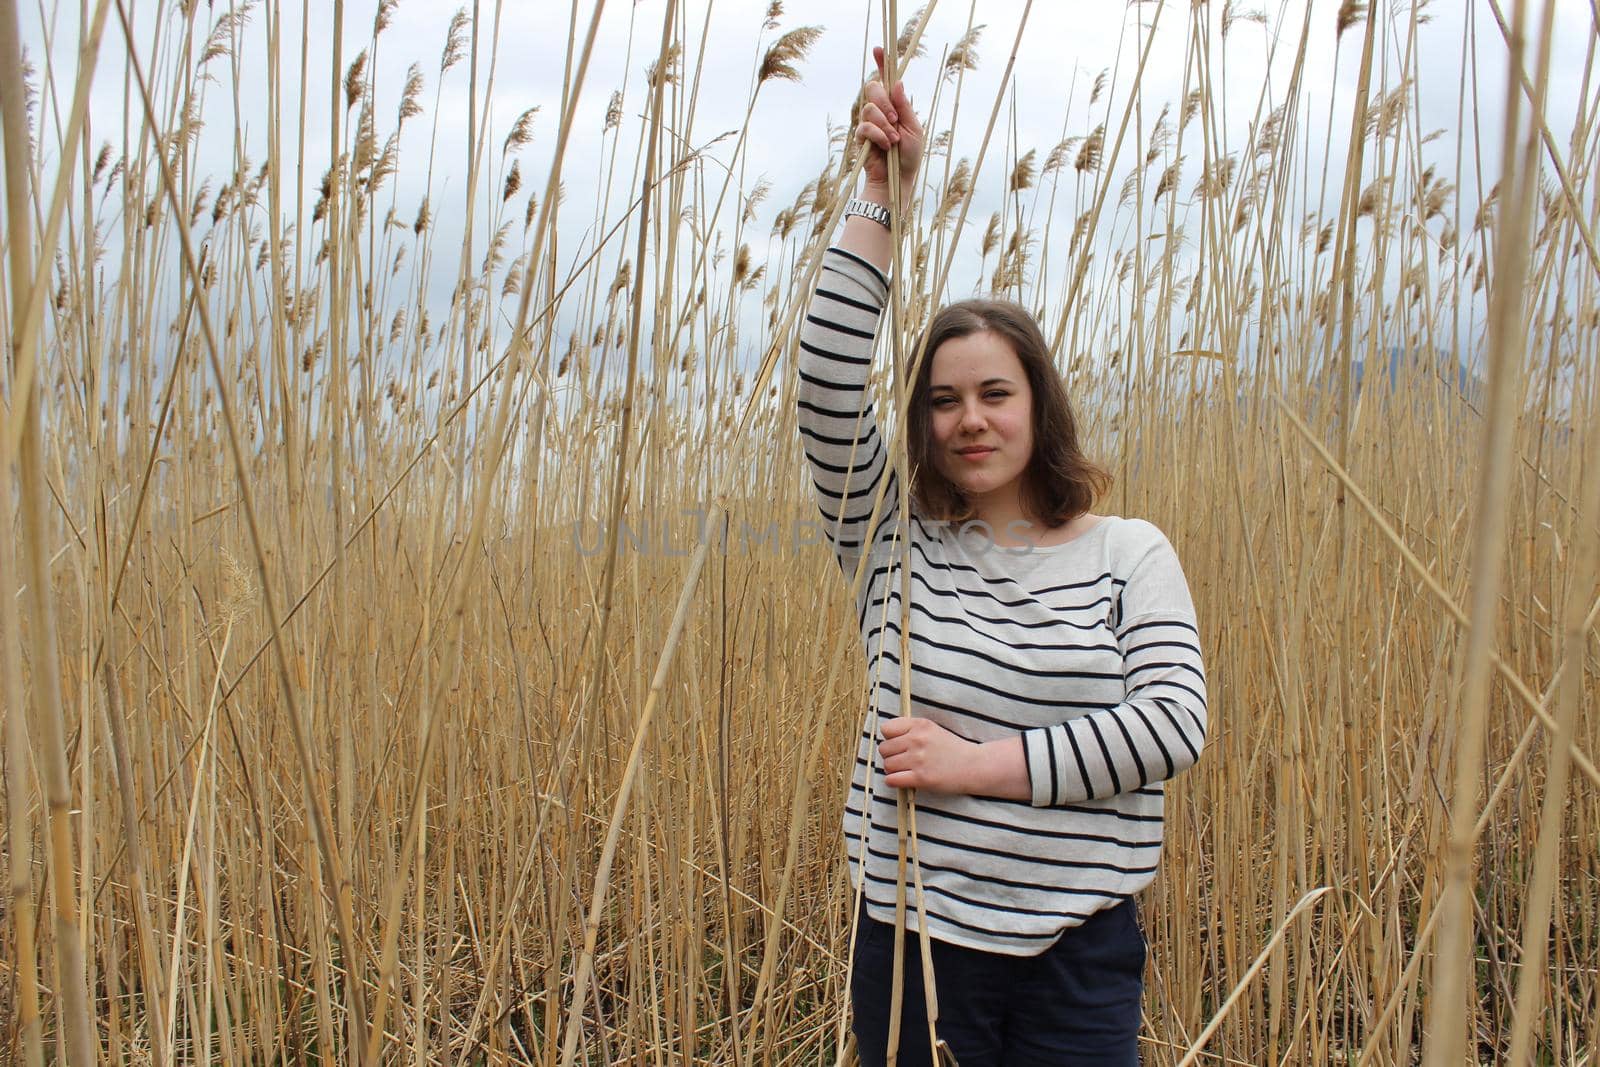 Portrait of a young girl in an outdoor field against a backdrop of wheat or tall grass. High quality photo